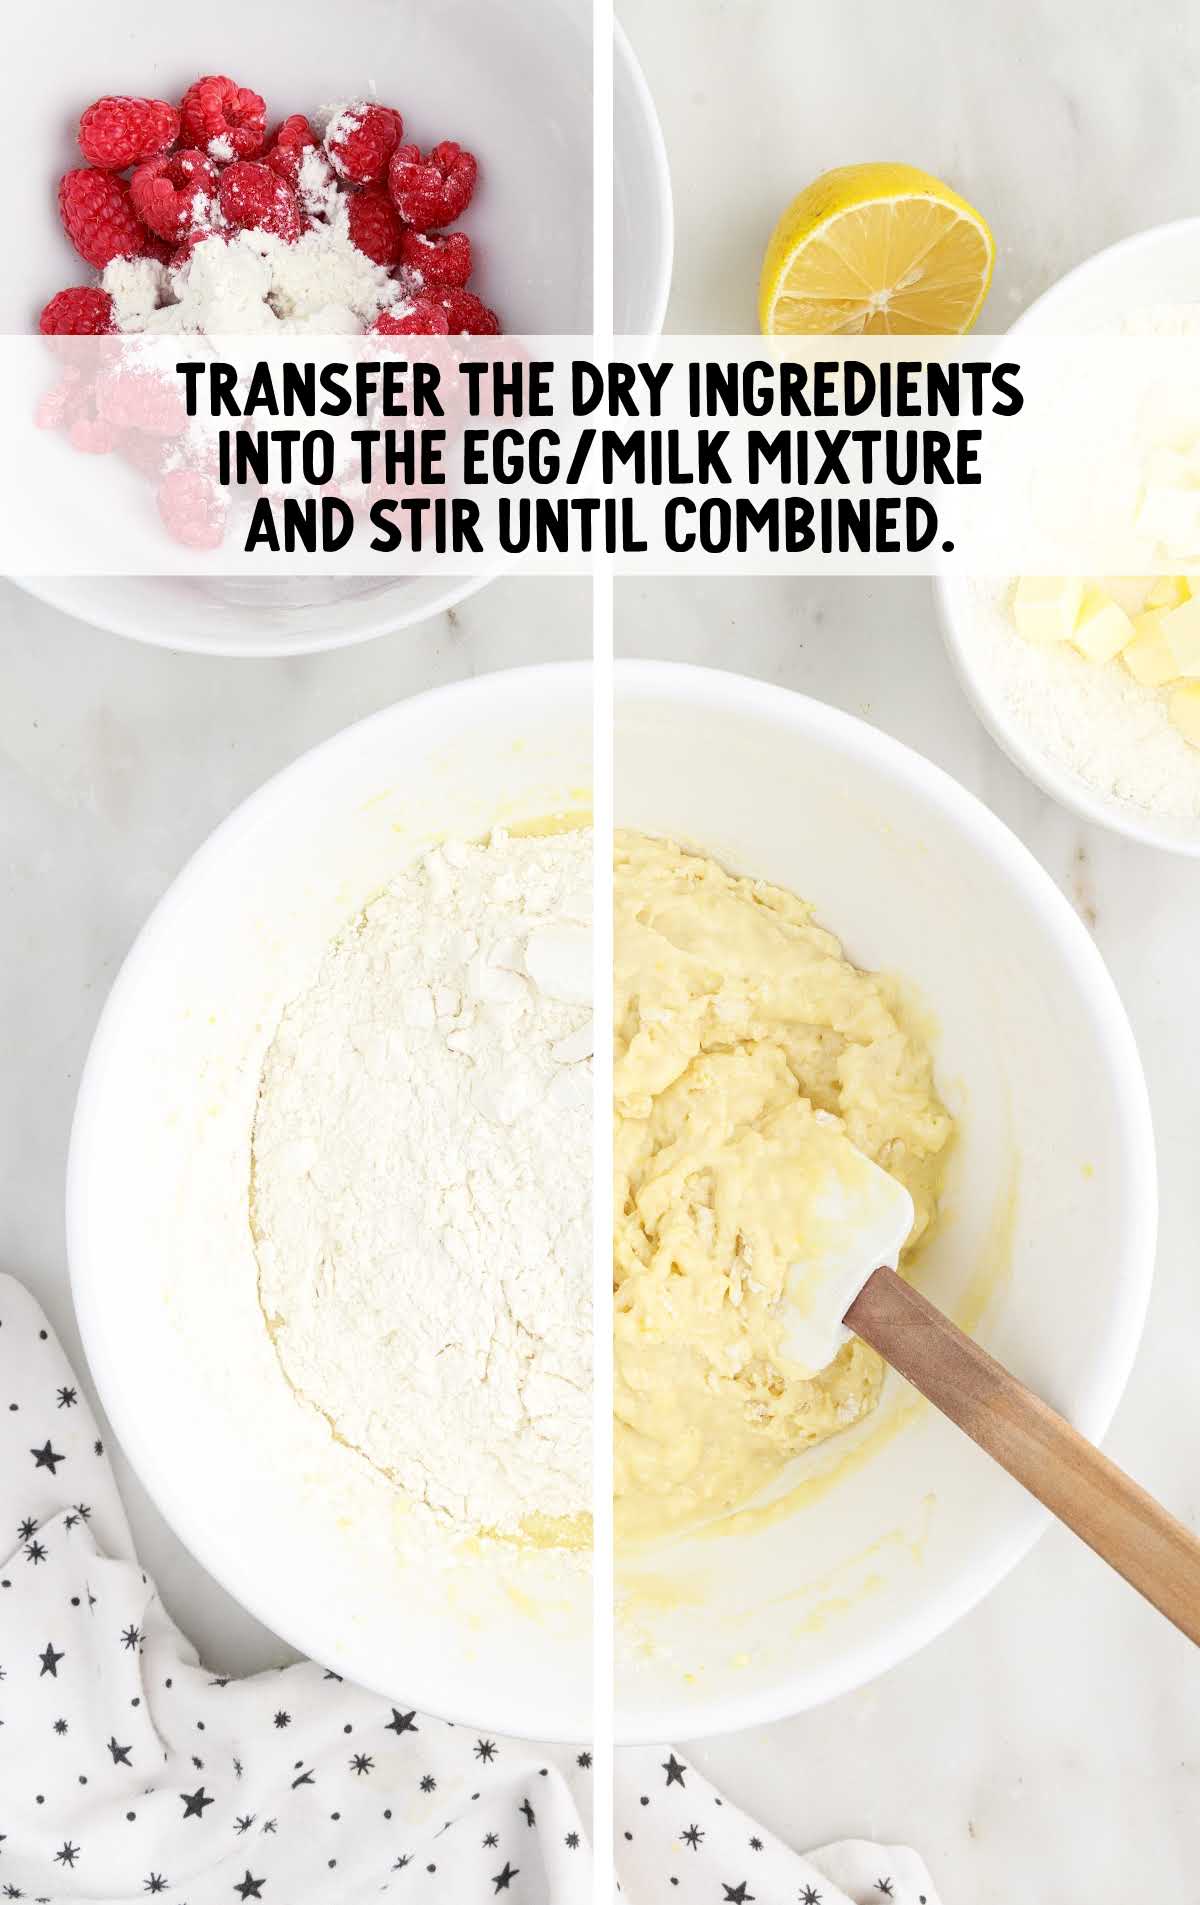 dry ingredients transferred into the egg/milk mixture and stirred